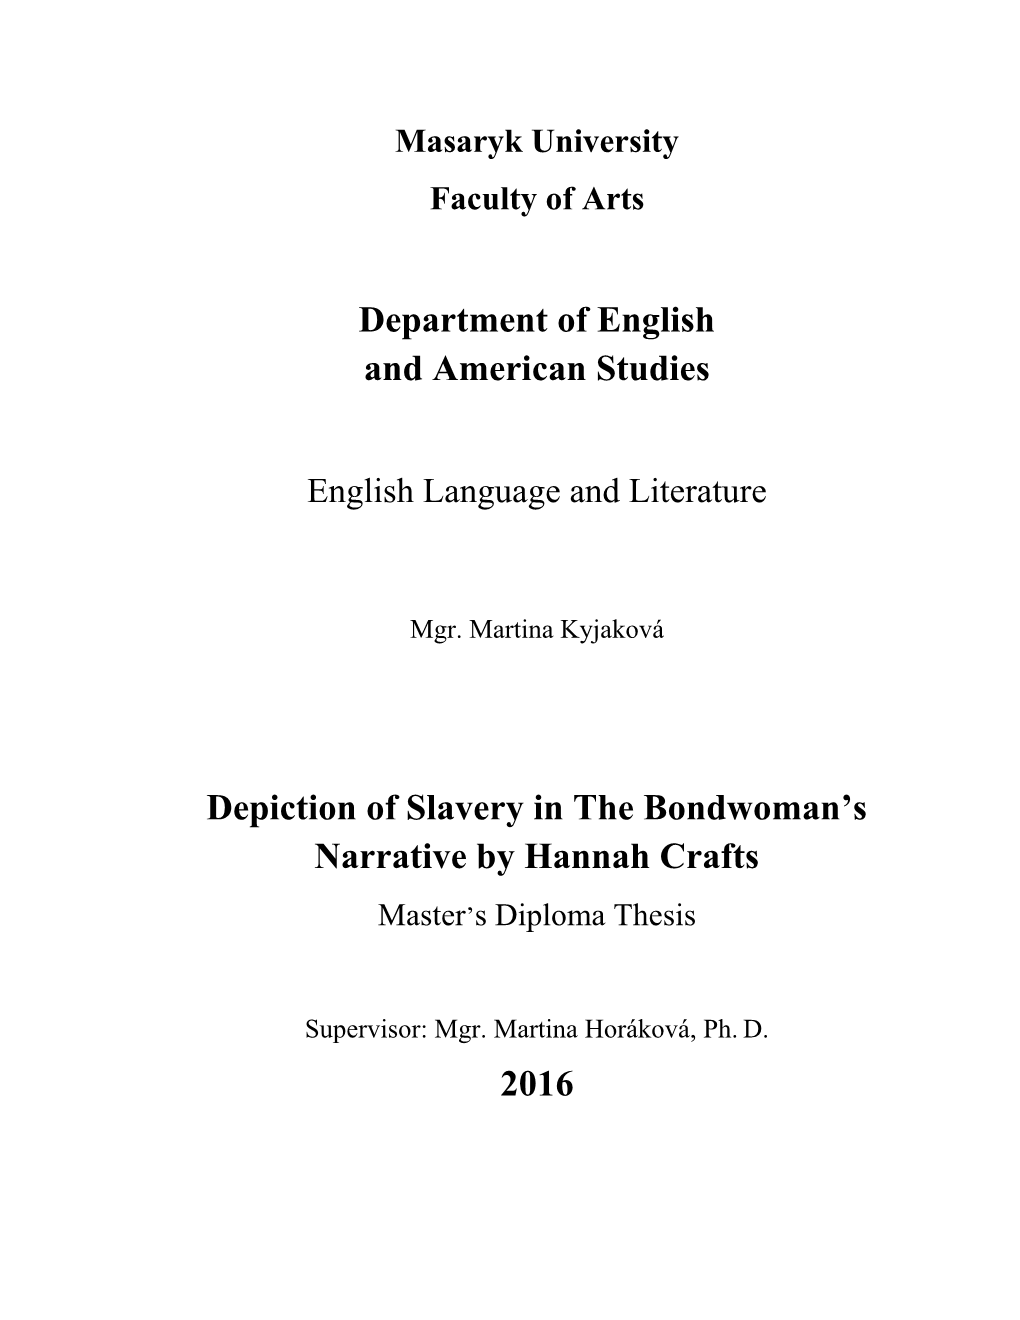 Department of English and American Studies Depiction of Slavery in The